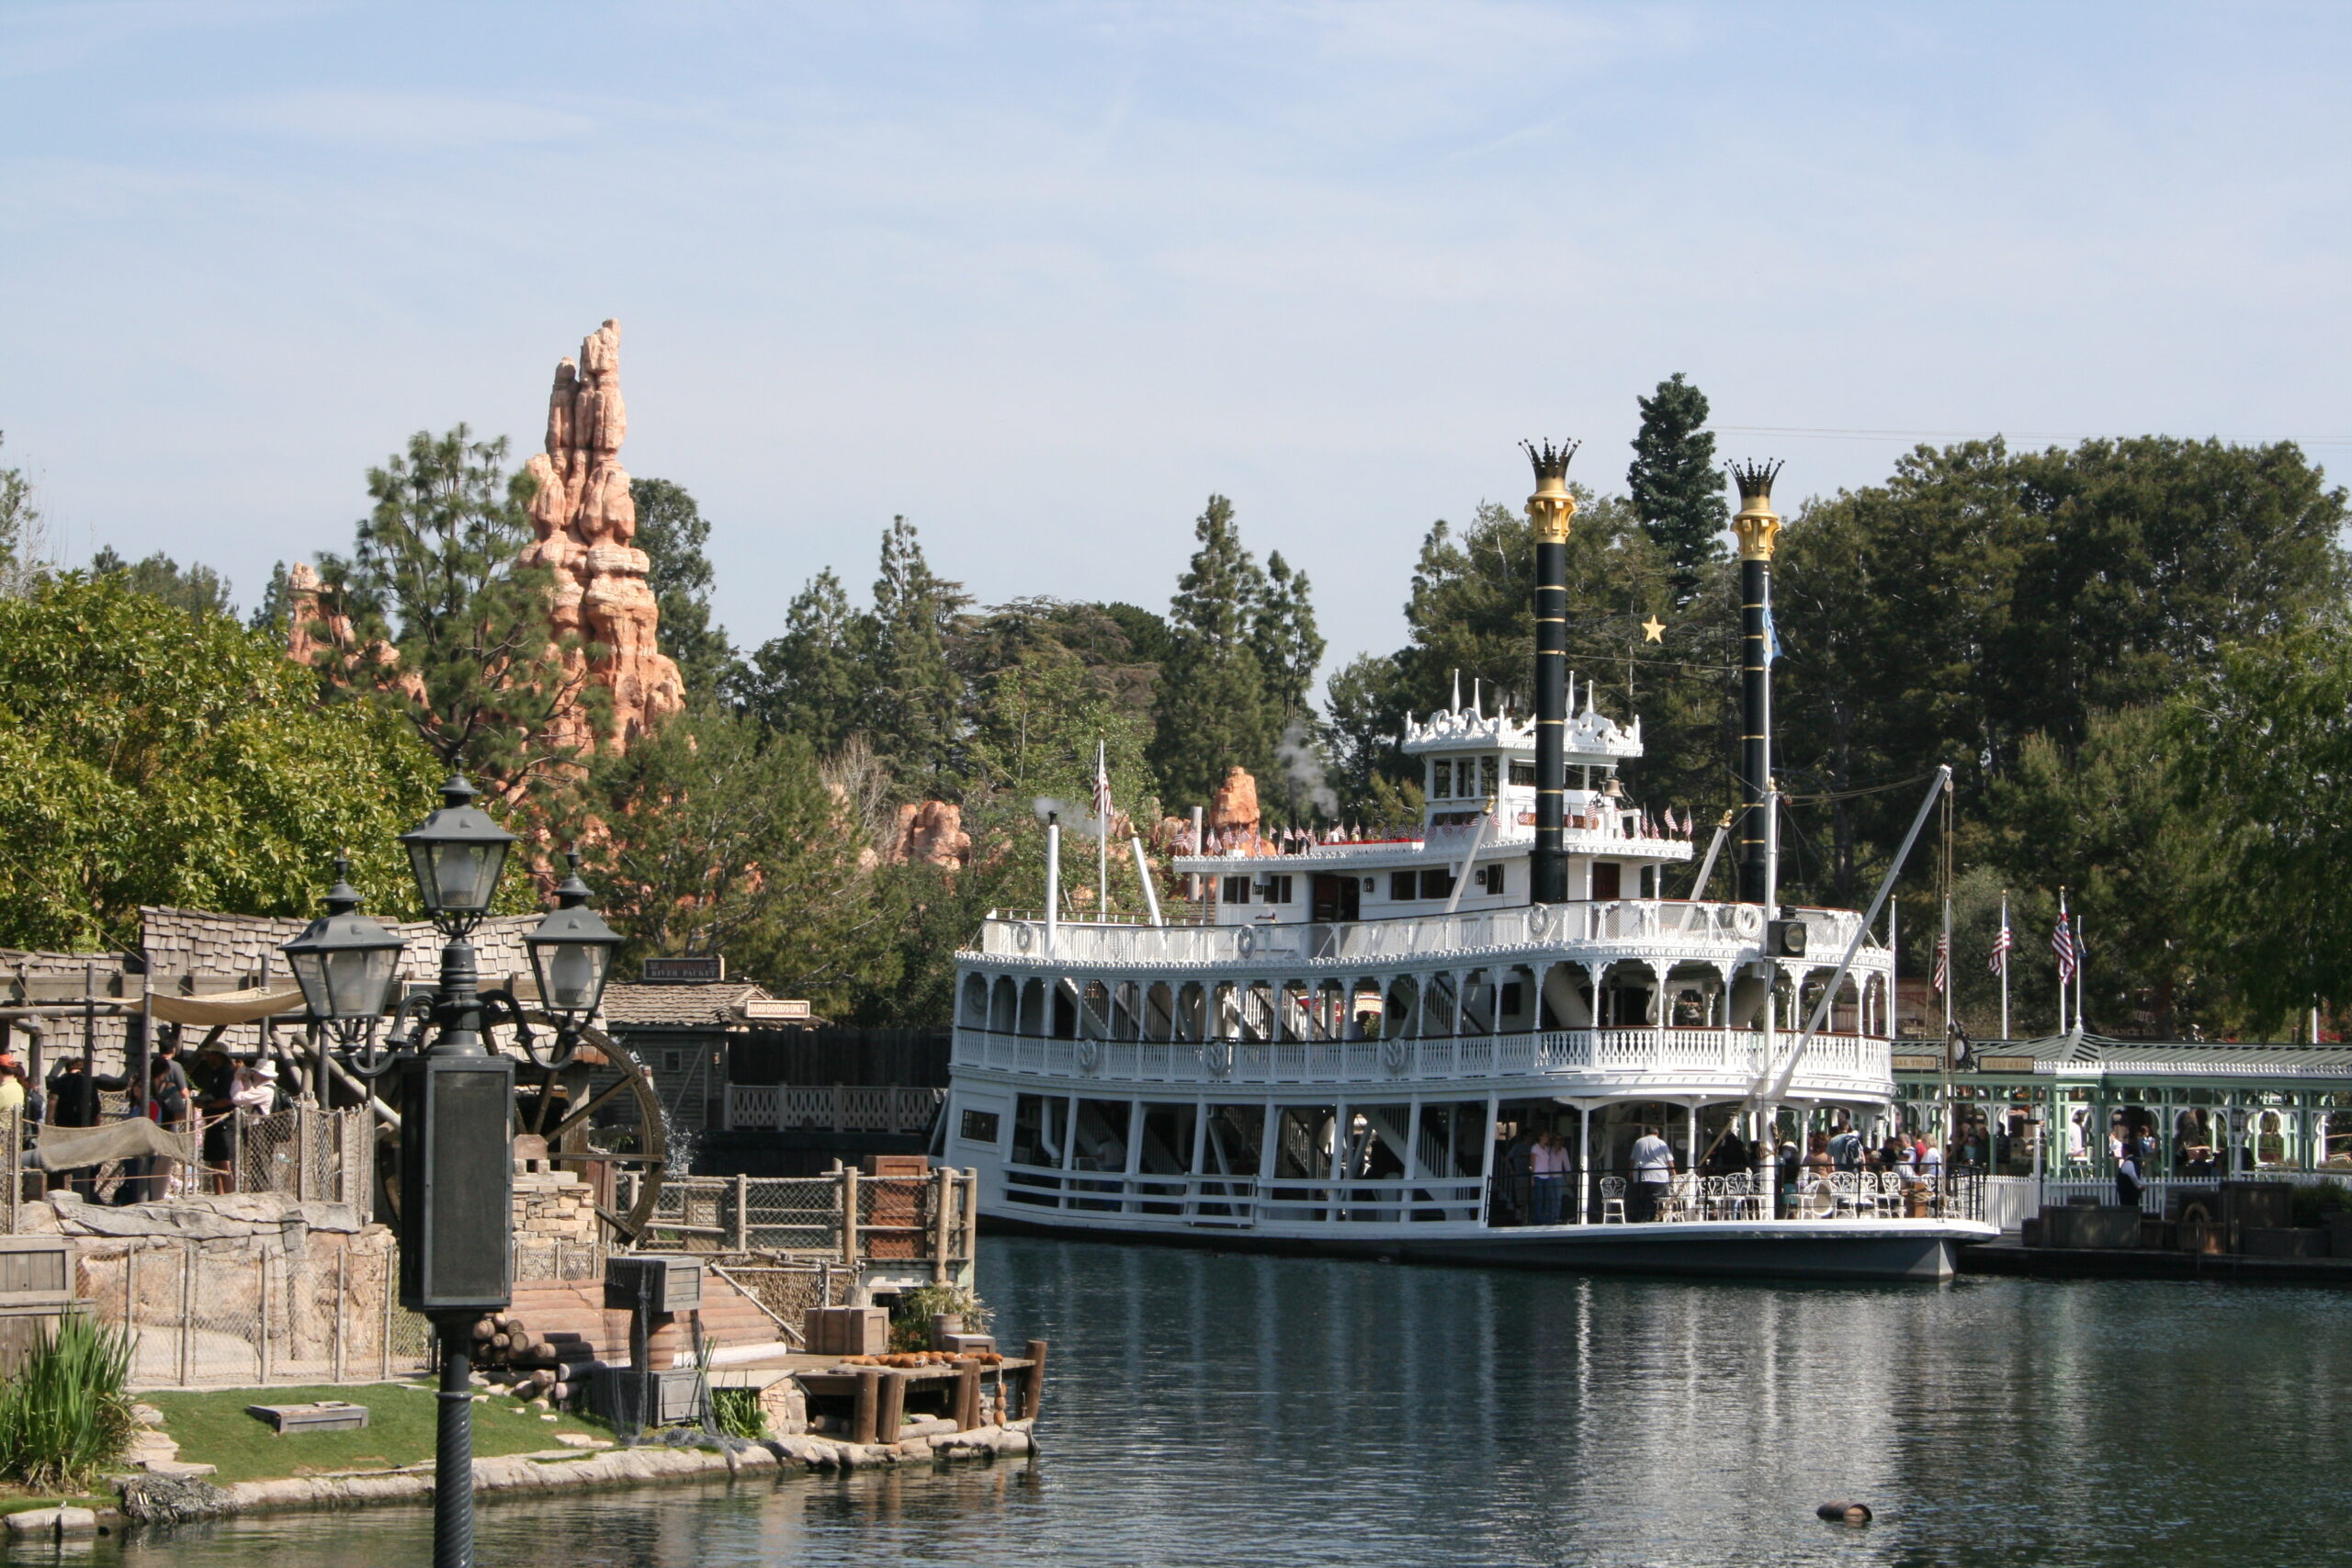 Disneyland's Mark Twain Riverboat is built at a 5/8 scale.